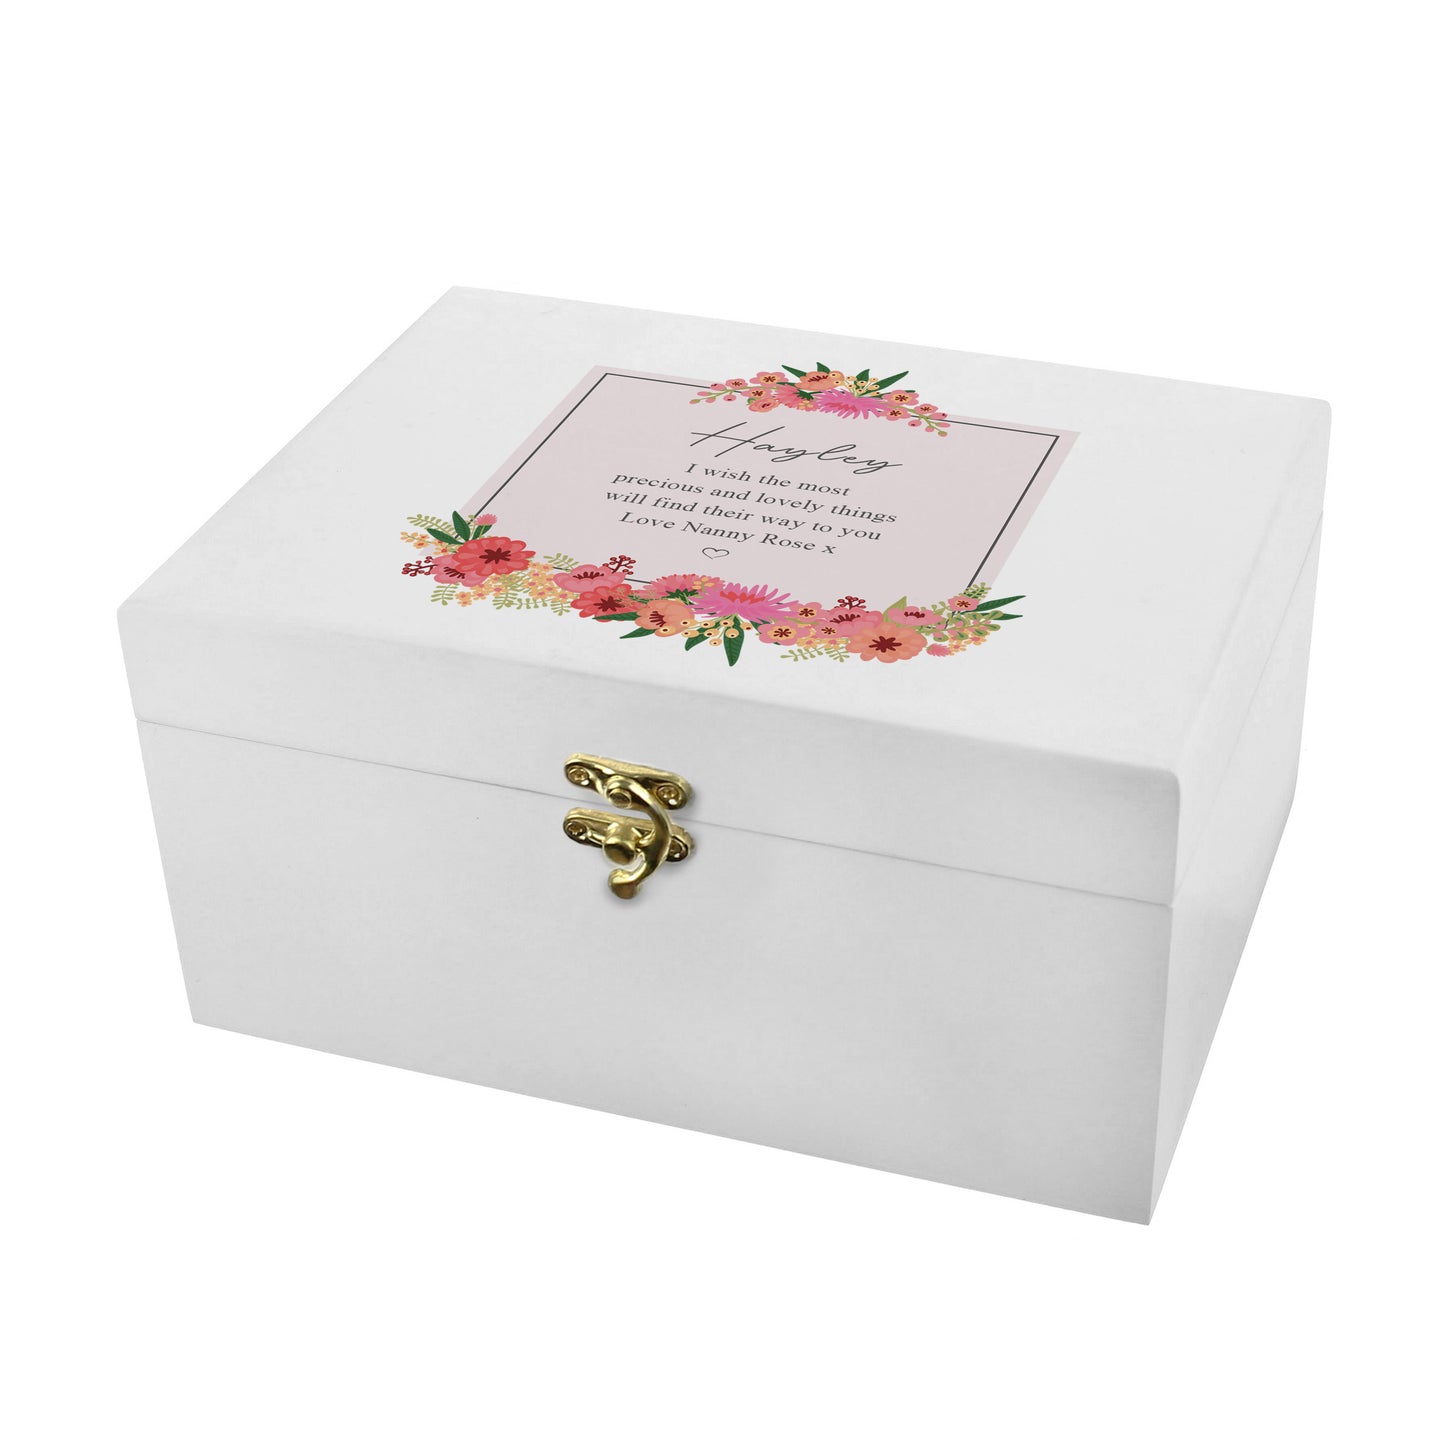 Personalised Floral Wishes White Wooden Keepsake Box - Personalise It!